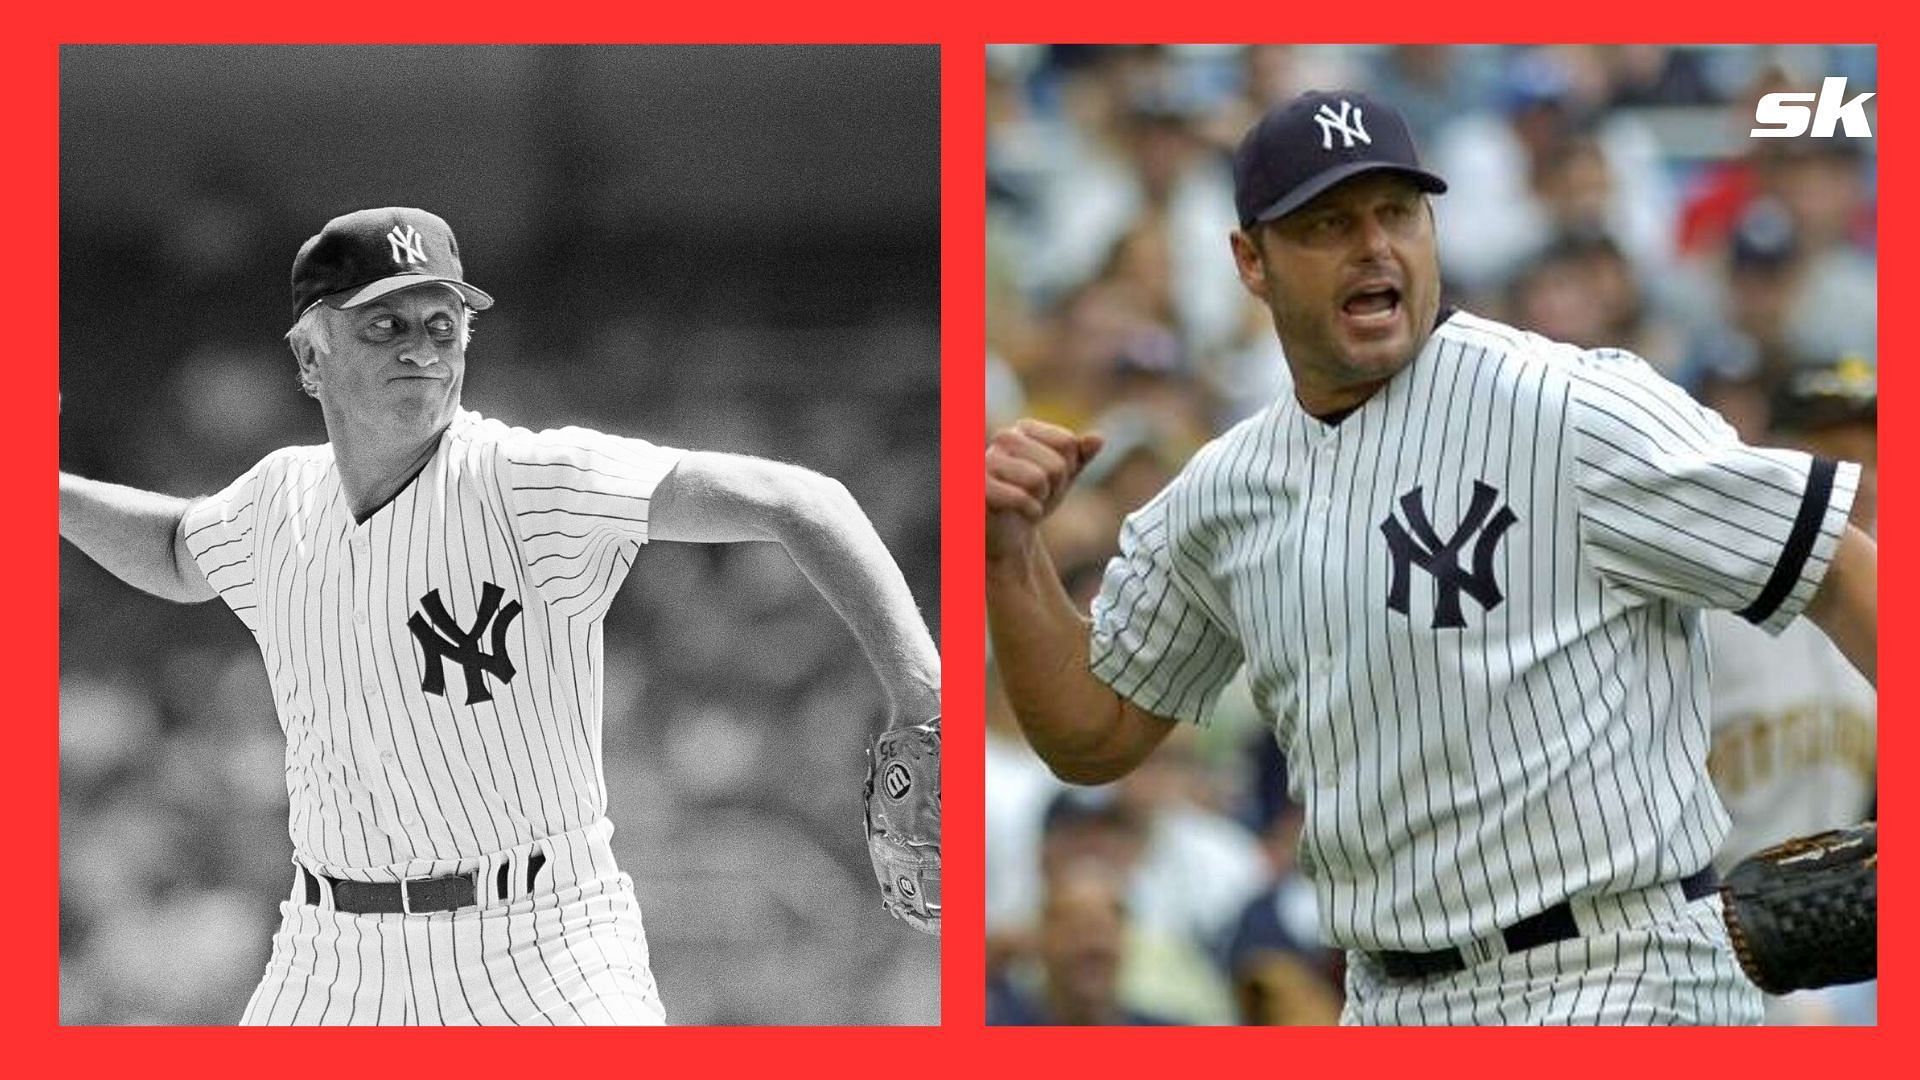 Has any Yankees pitcher achieved 300 Wins in their career?